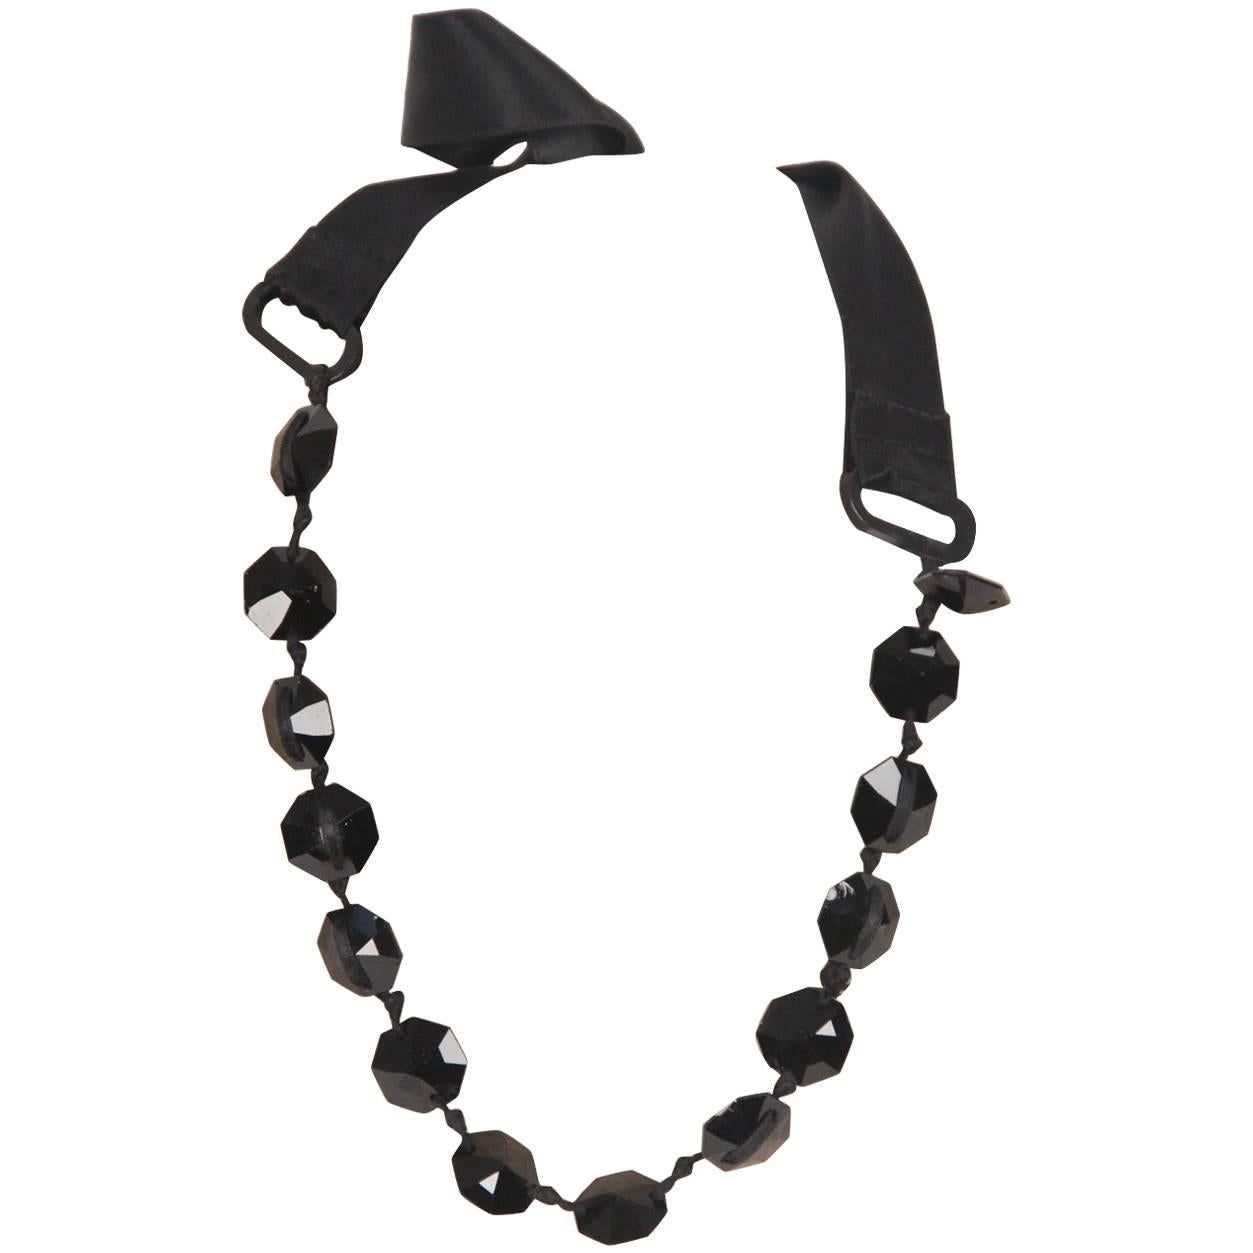 Lanvin Black Satin Ribbon and Faceted Glass Beads Necklace